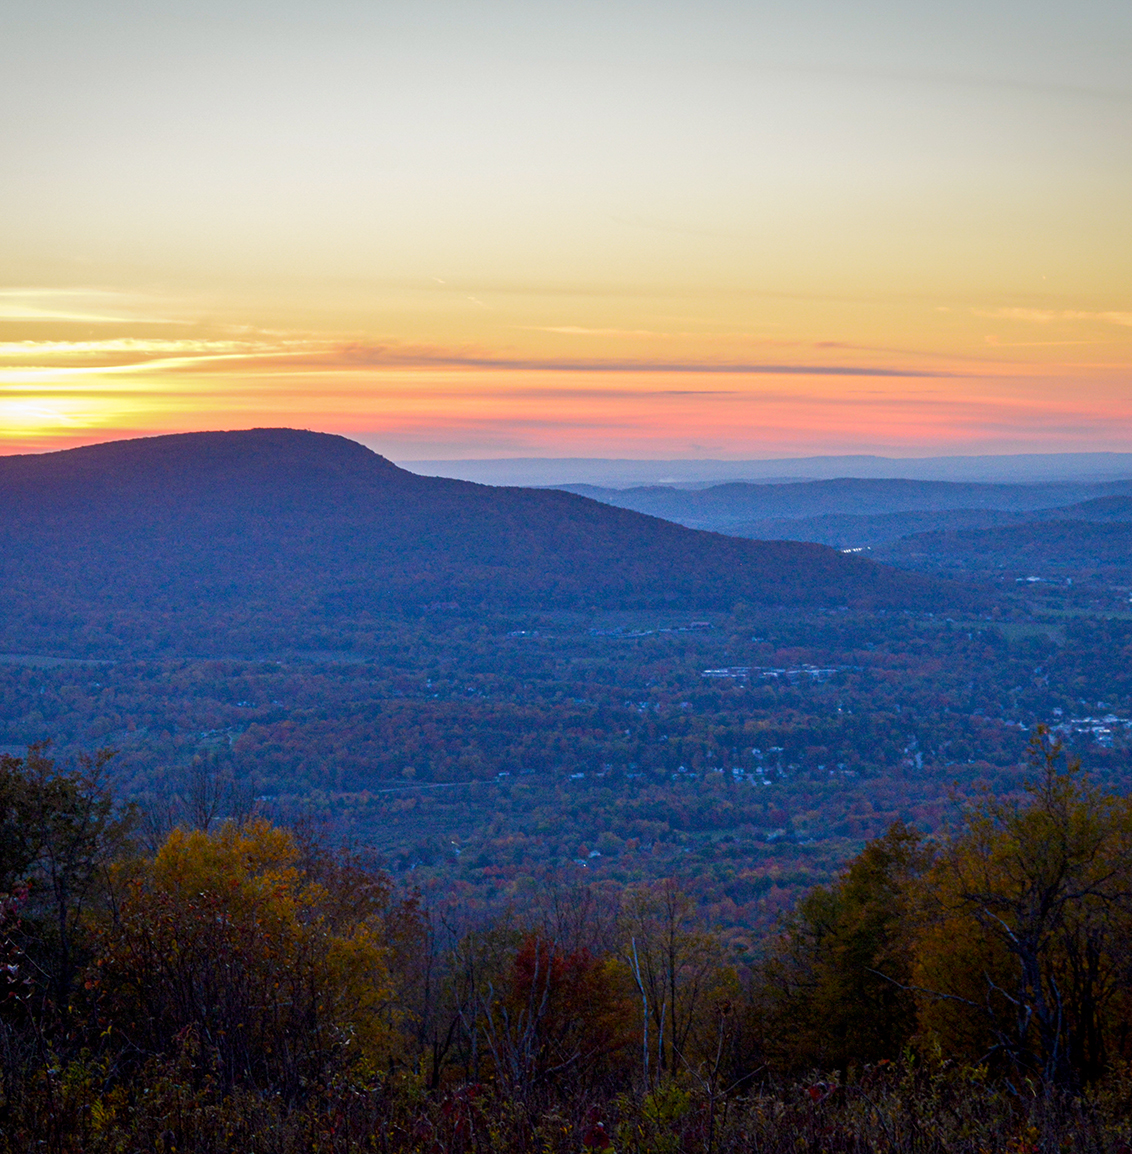 The view of the Vermont sunset from the Long Trail.